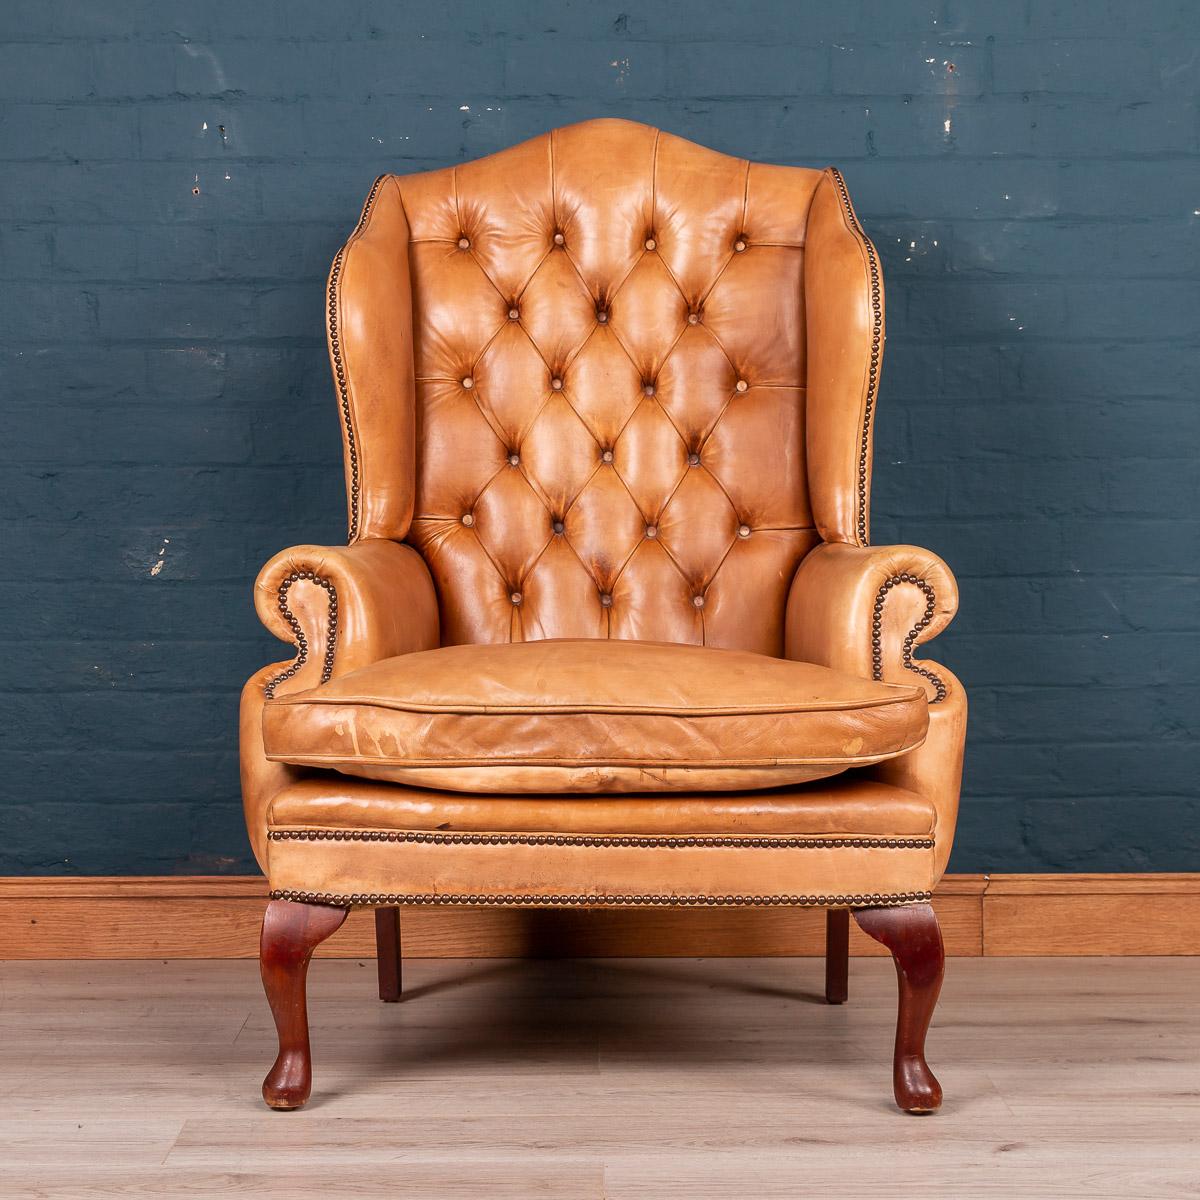 A lovely English wing back leather chair with button down backrest, late 20th century. Great patina, hand dyed leather.

Condition
In Good Condition - wear and tear as expected, some fading to the leather.

Size
Height: 120 cm
Width: 84